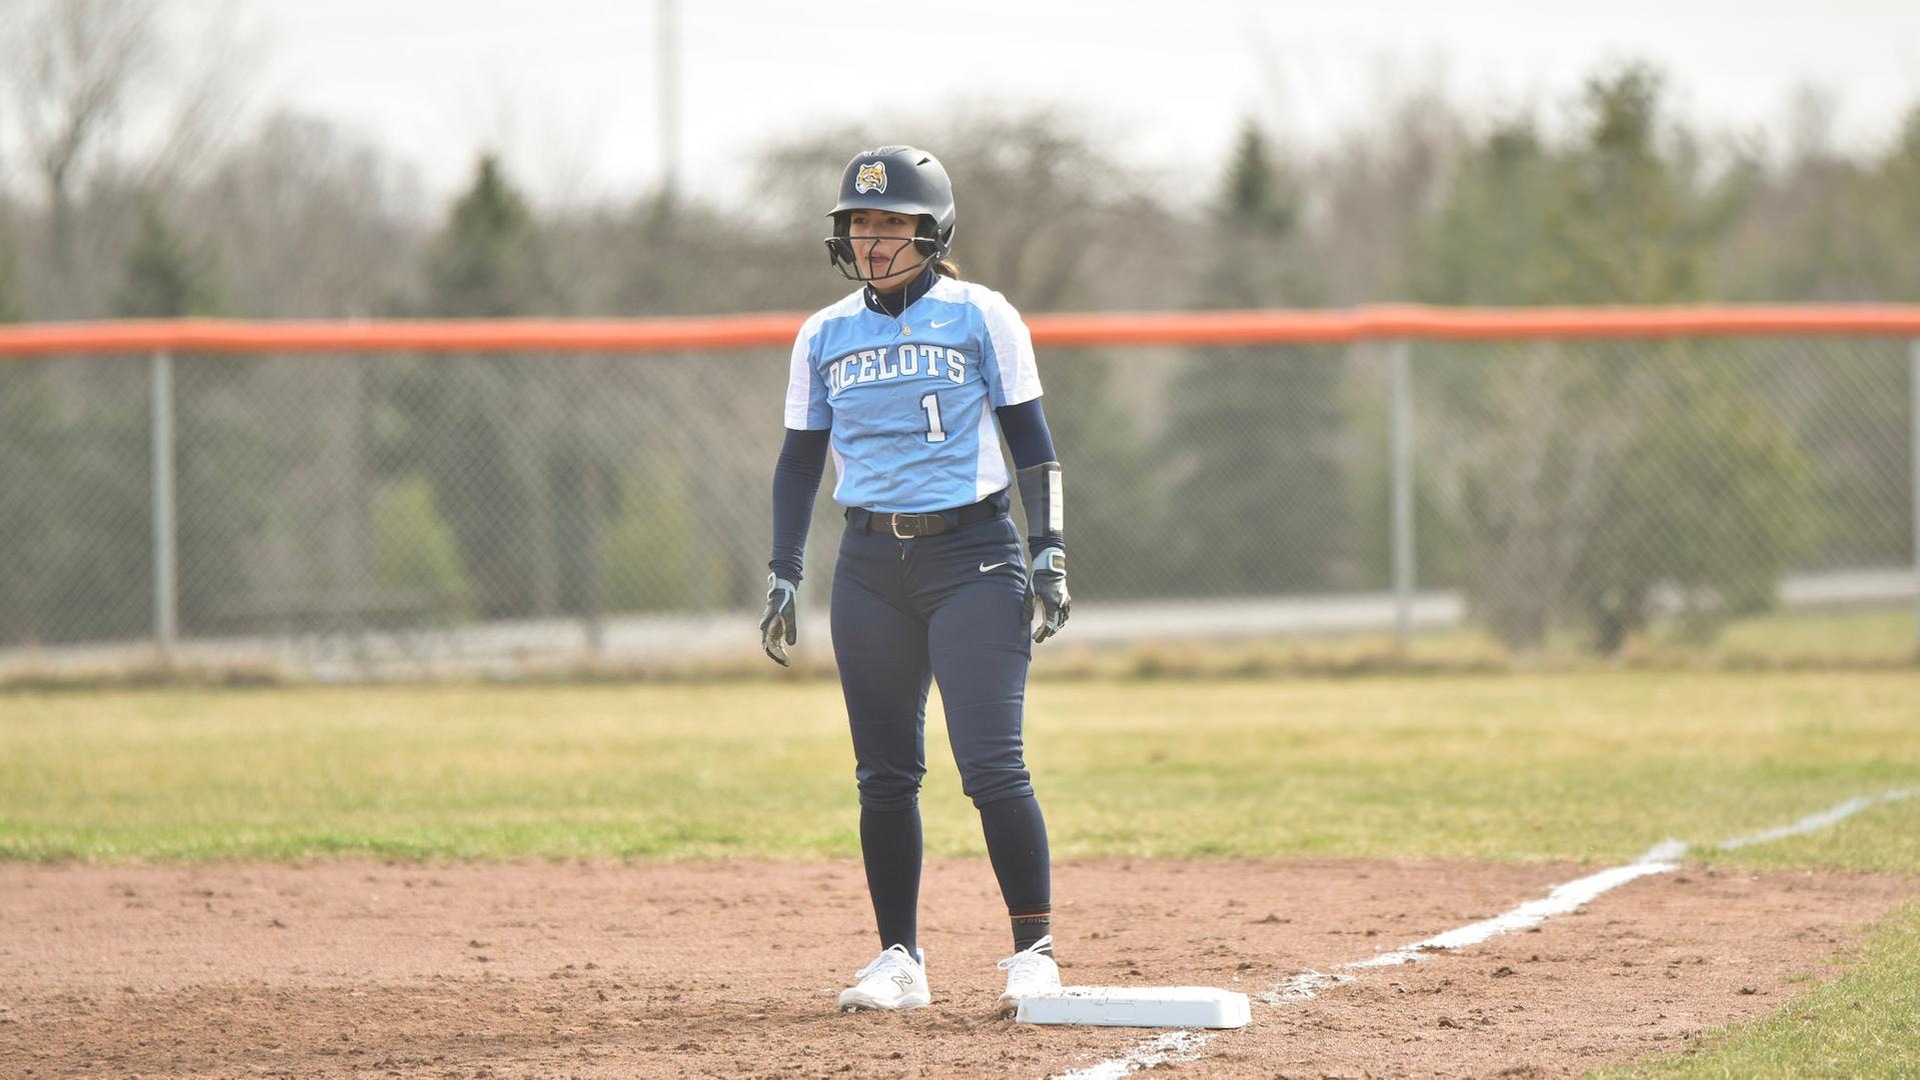 Offensive Outburst Leads Ocelots to MCCAA DH Sweep